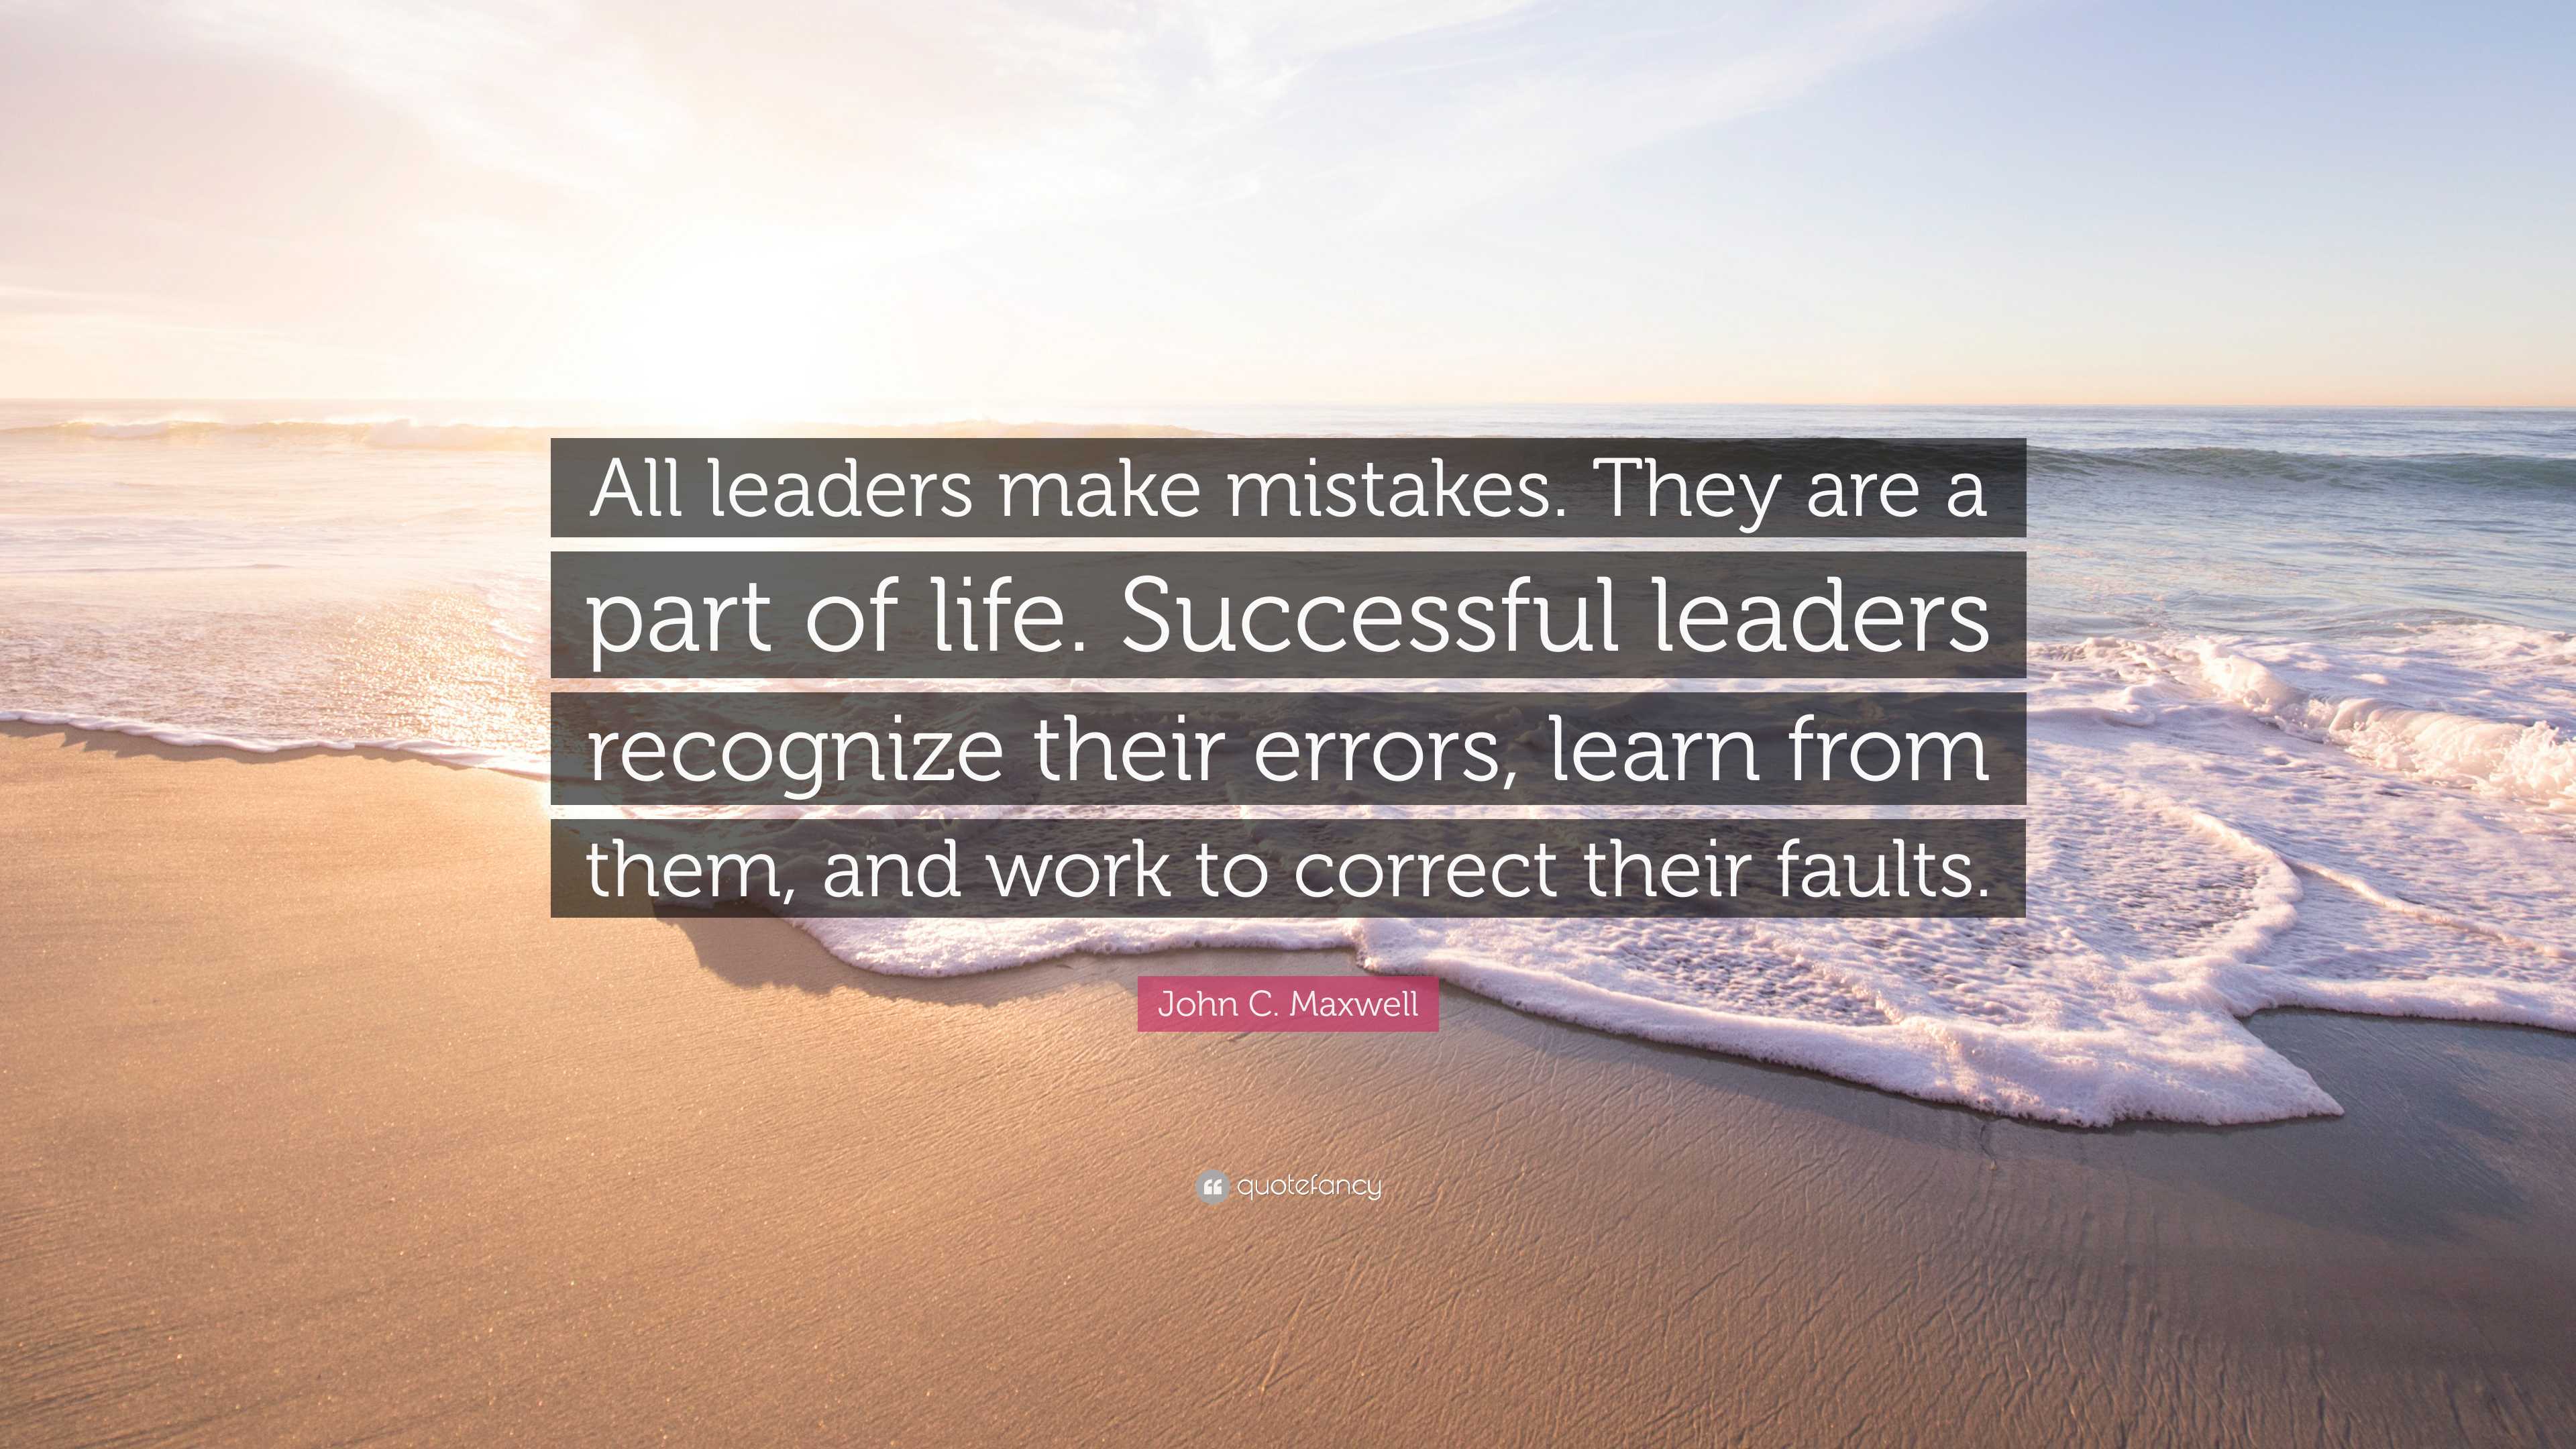 When leaders make mistakes